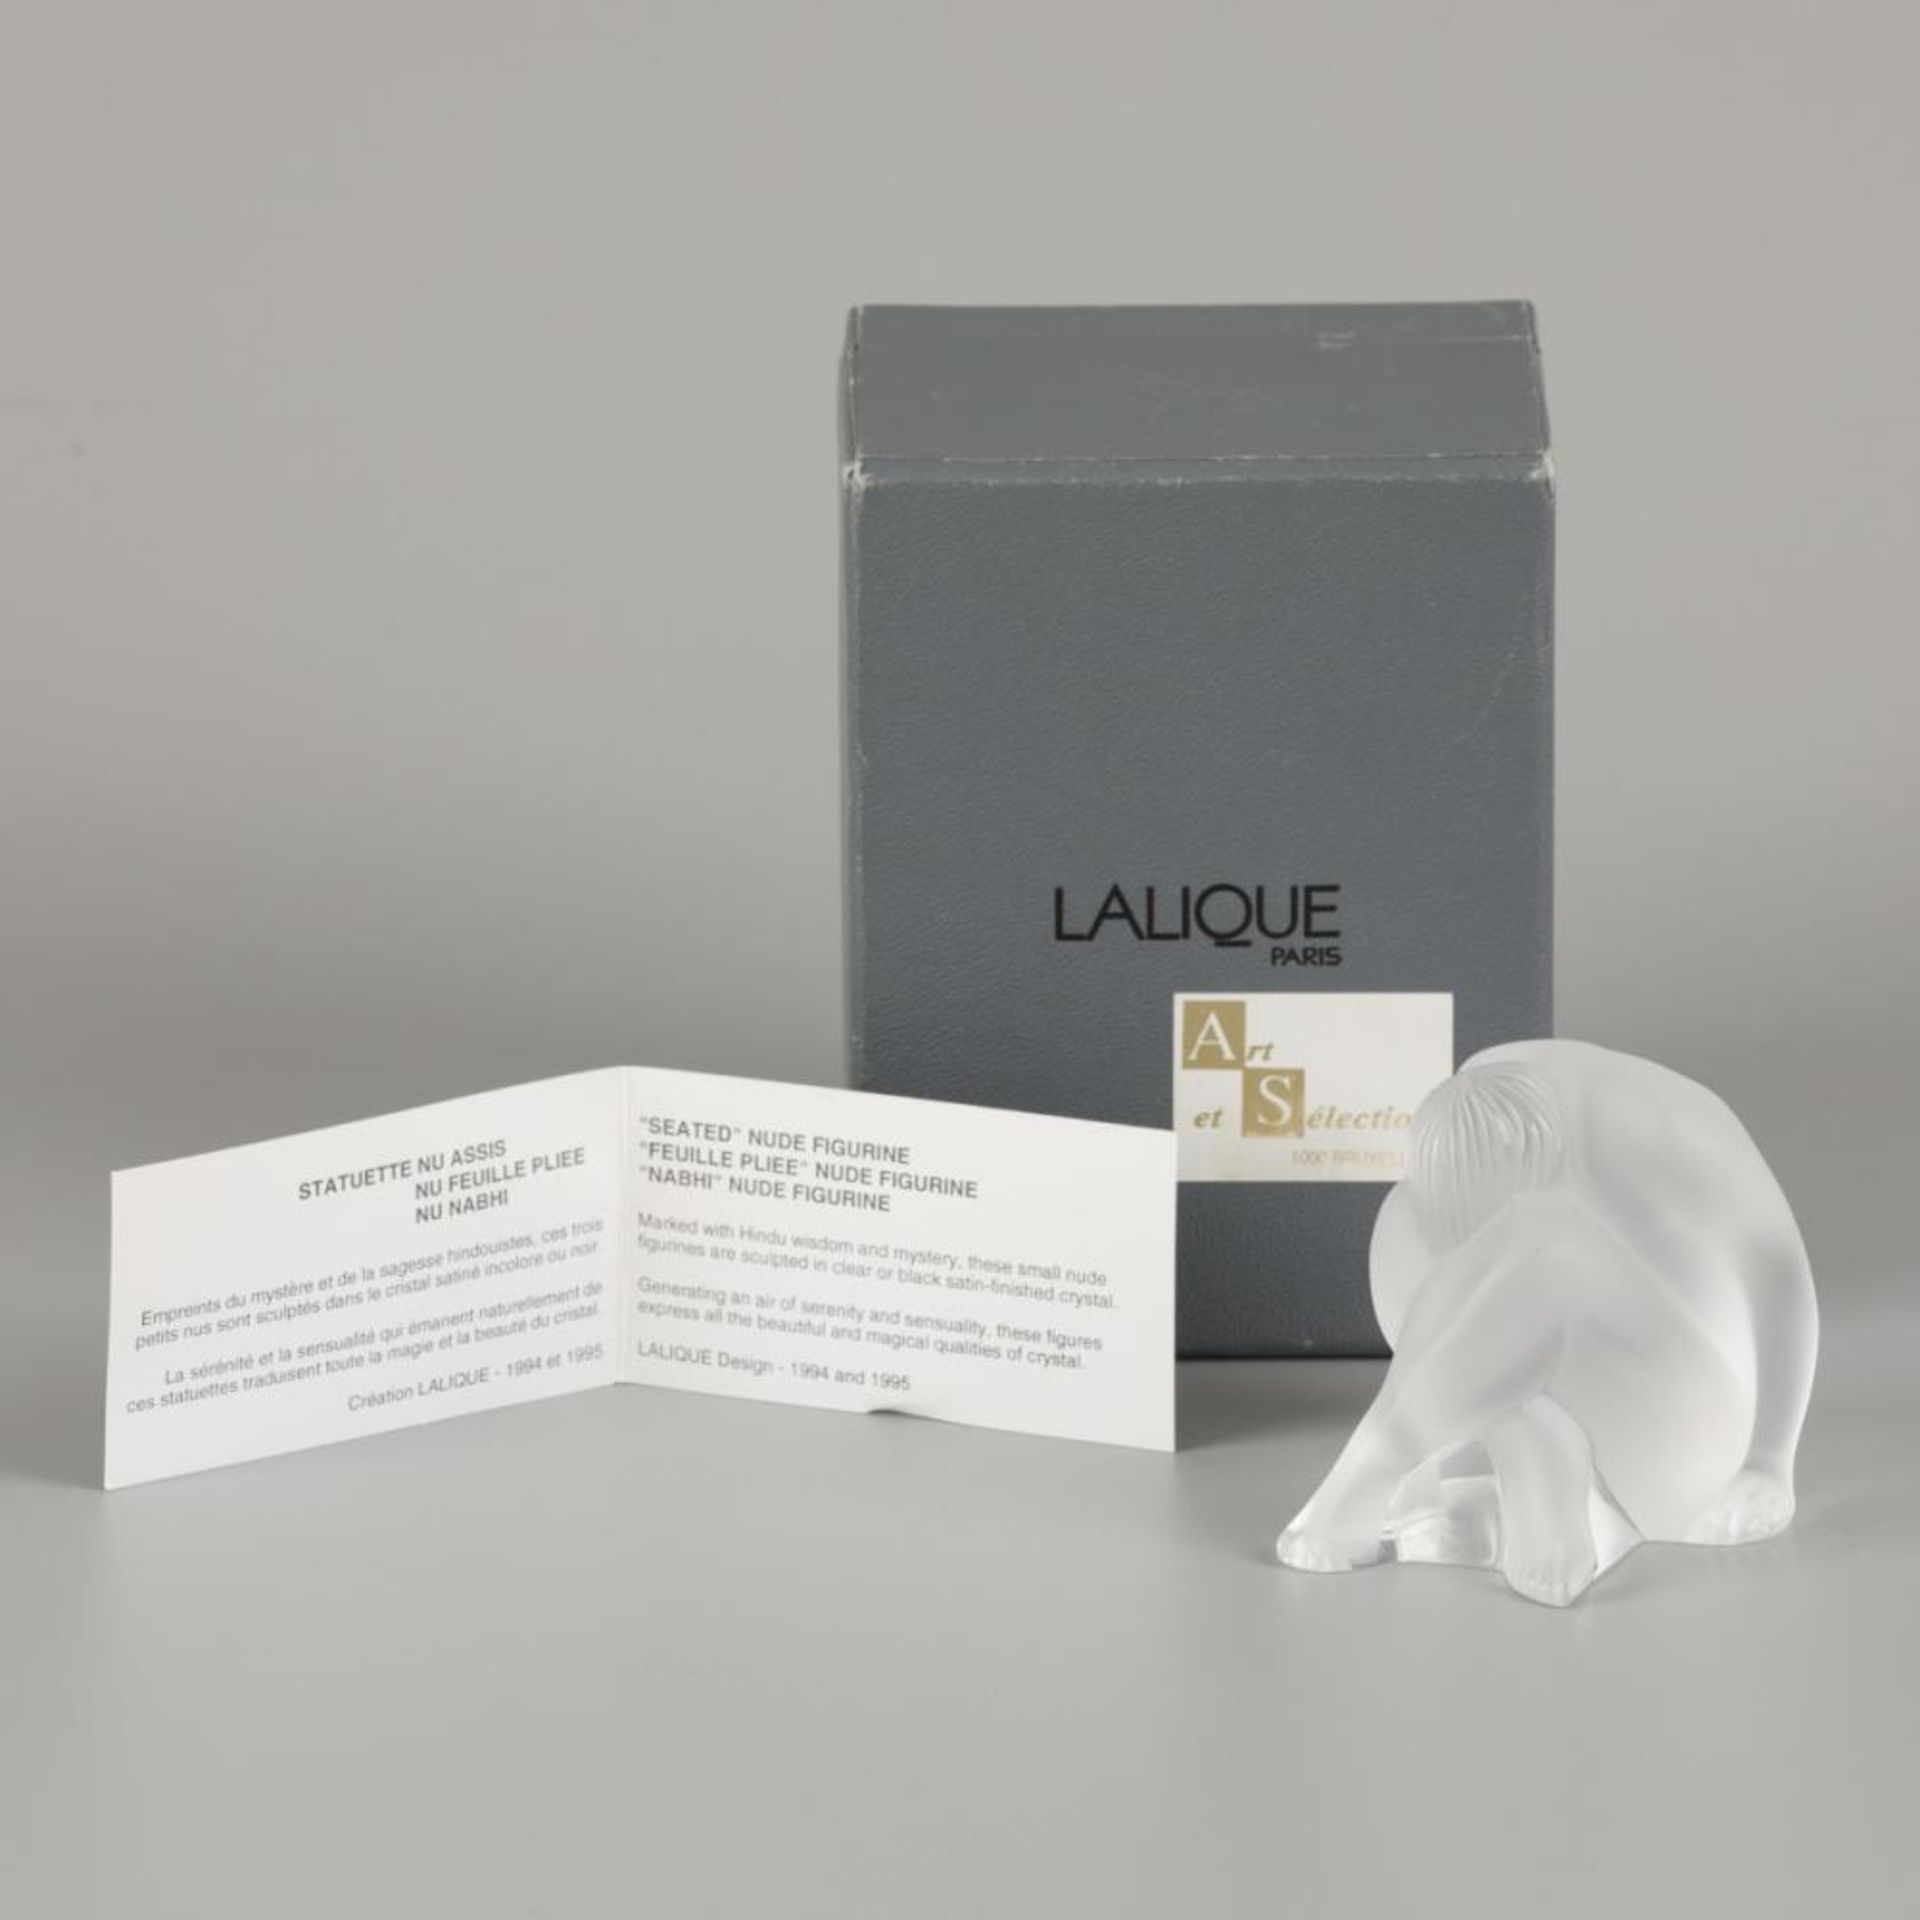 A glass sculpture "nu assis", Lalique, late 20th century. - Image 2 of 5